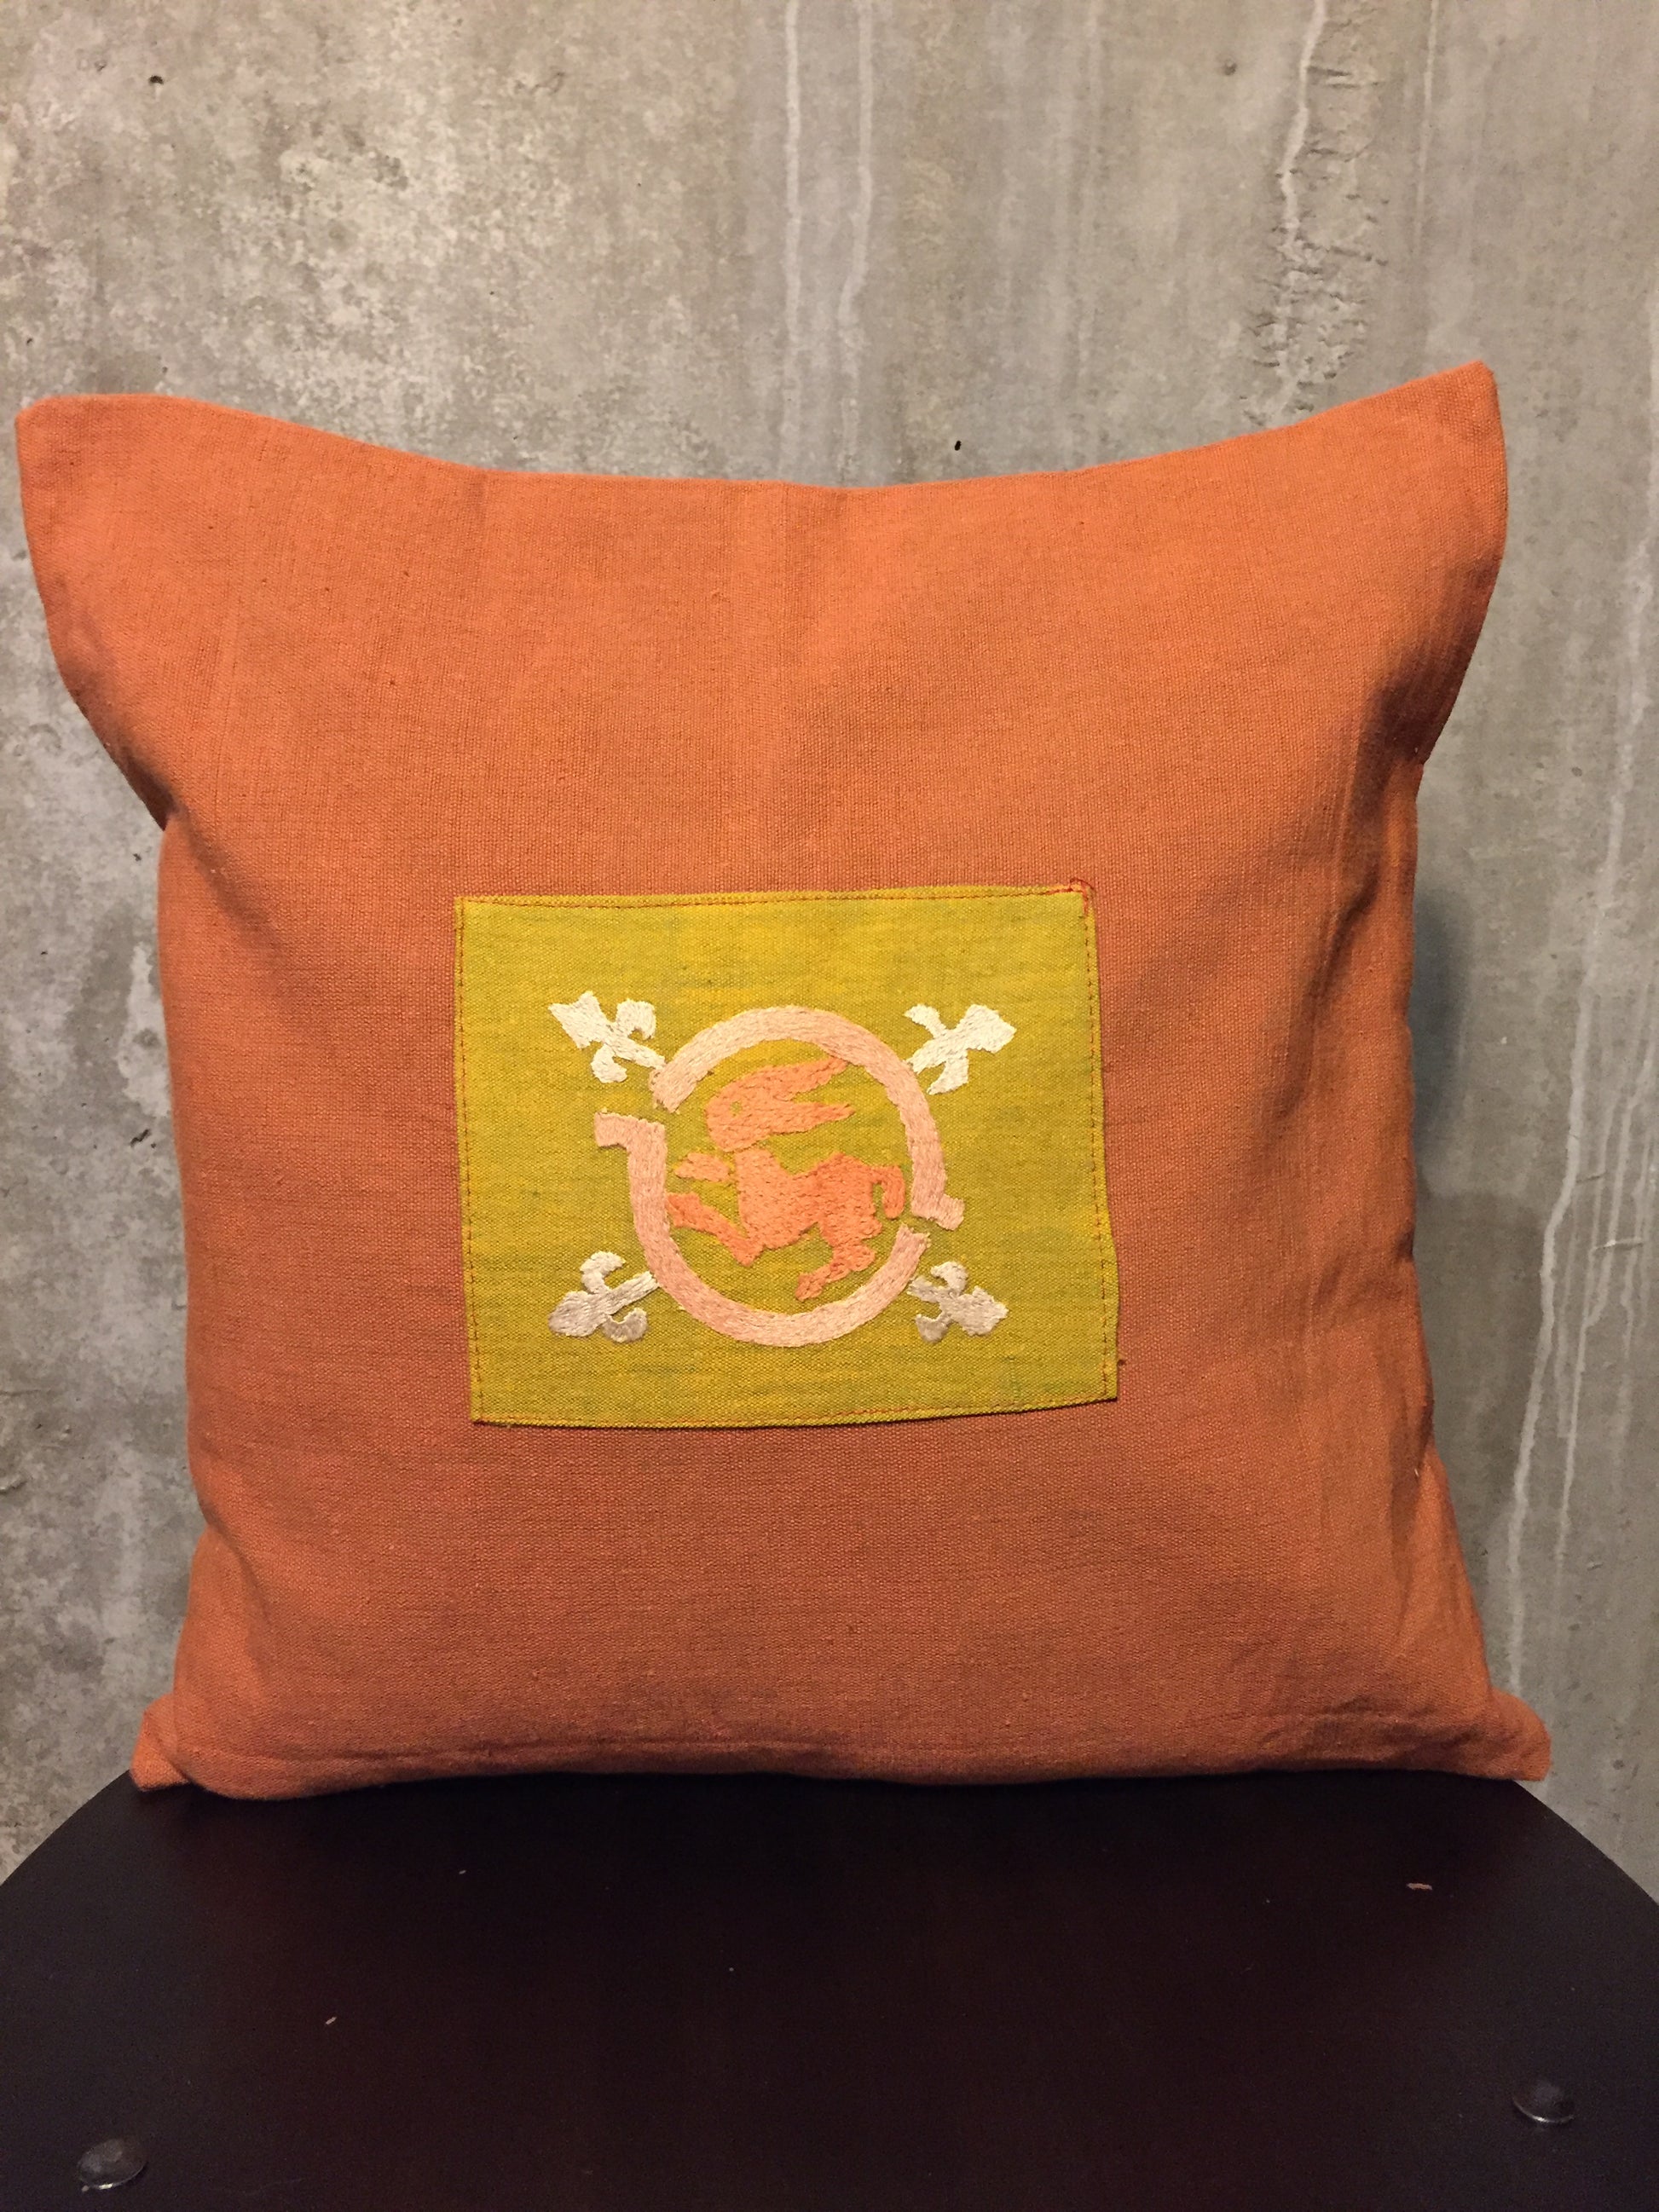 Handwoven Egyptian Cotton Cushion Cover - Hand Embroidered Art - Rabbit Motif